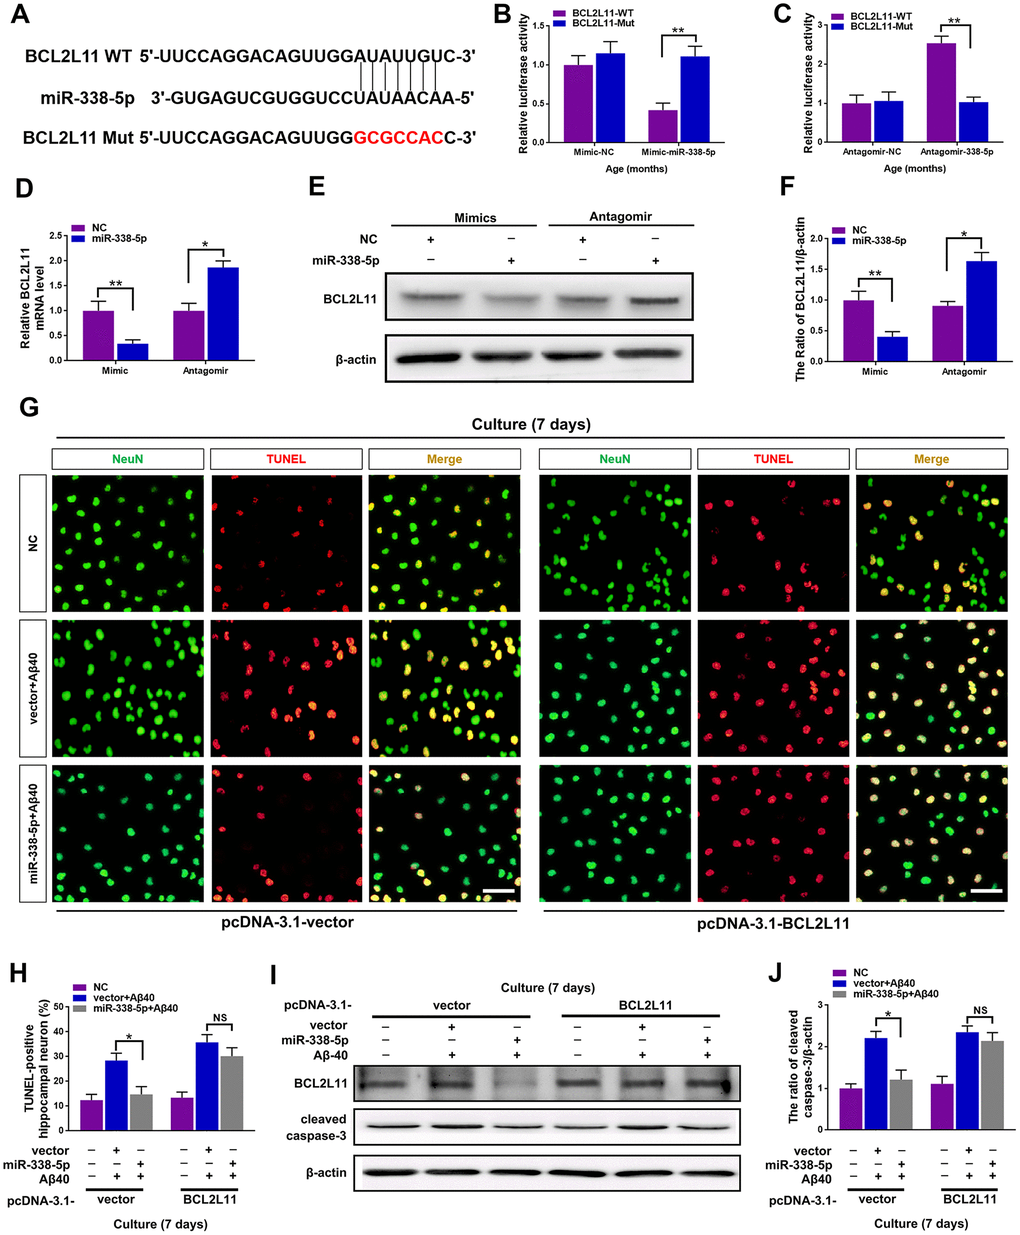 miR-338-5p ameliorated neuronal apoptosis by directly targeting BCL2L11. (A) TargetScan was used to predict the binding sites of miR-338-5p within the 3ʹ-UTR of BCL2L11. (B) Overexpressing miR-338-5p resulted in a remarkable decrease in luciferase activity of BCL2L11-WT and exerted no effect on luciferase activity of BCL2L11-Mut in primary hippocampal neurons. (C) Silencing miR-338-5p caused a significant increase in luciferase activity of BCL2L11-WT and exerted no effect on luciferase activity of BCL2L11-Mut in primary hippocampal neurons. (D–F) Relative BCL2L11 mRNA level (D) and protein expression (E, F) of primary hippocampal neurons transfected with NC mimic or miR-338-5p mimic, or NC antagomir or miR-338-5p antagomir determined by qRT-PCR and Western blot respectively. (G–I) Primary hippocampal neurons were transfected with pcDNA3.1-vector or pcDNA3.1-BCL2L11. Two days later, neurons were cultured for consecutive 7 days with or without 5 mM Aβ40. (G, H) The representative immunofluorescent images (G) and quantification (H) of TUNEL-positive hippocampal neurons in vitro. (I, J) The quantification of TUNEL-positive hippocampal neuron in vitro. The representative western blot images (I) and quantification analysis (J) of cleaved caspase-3 expression. Scale bar=50 μm. Results are presented as mean ± SD. n = 3 in each group. *P P